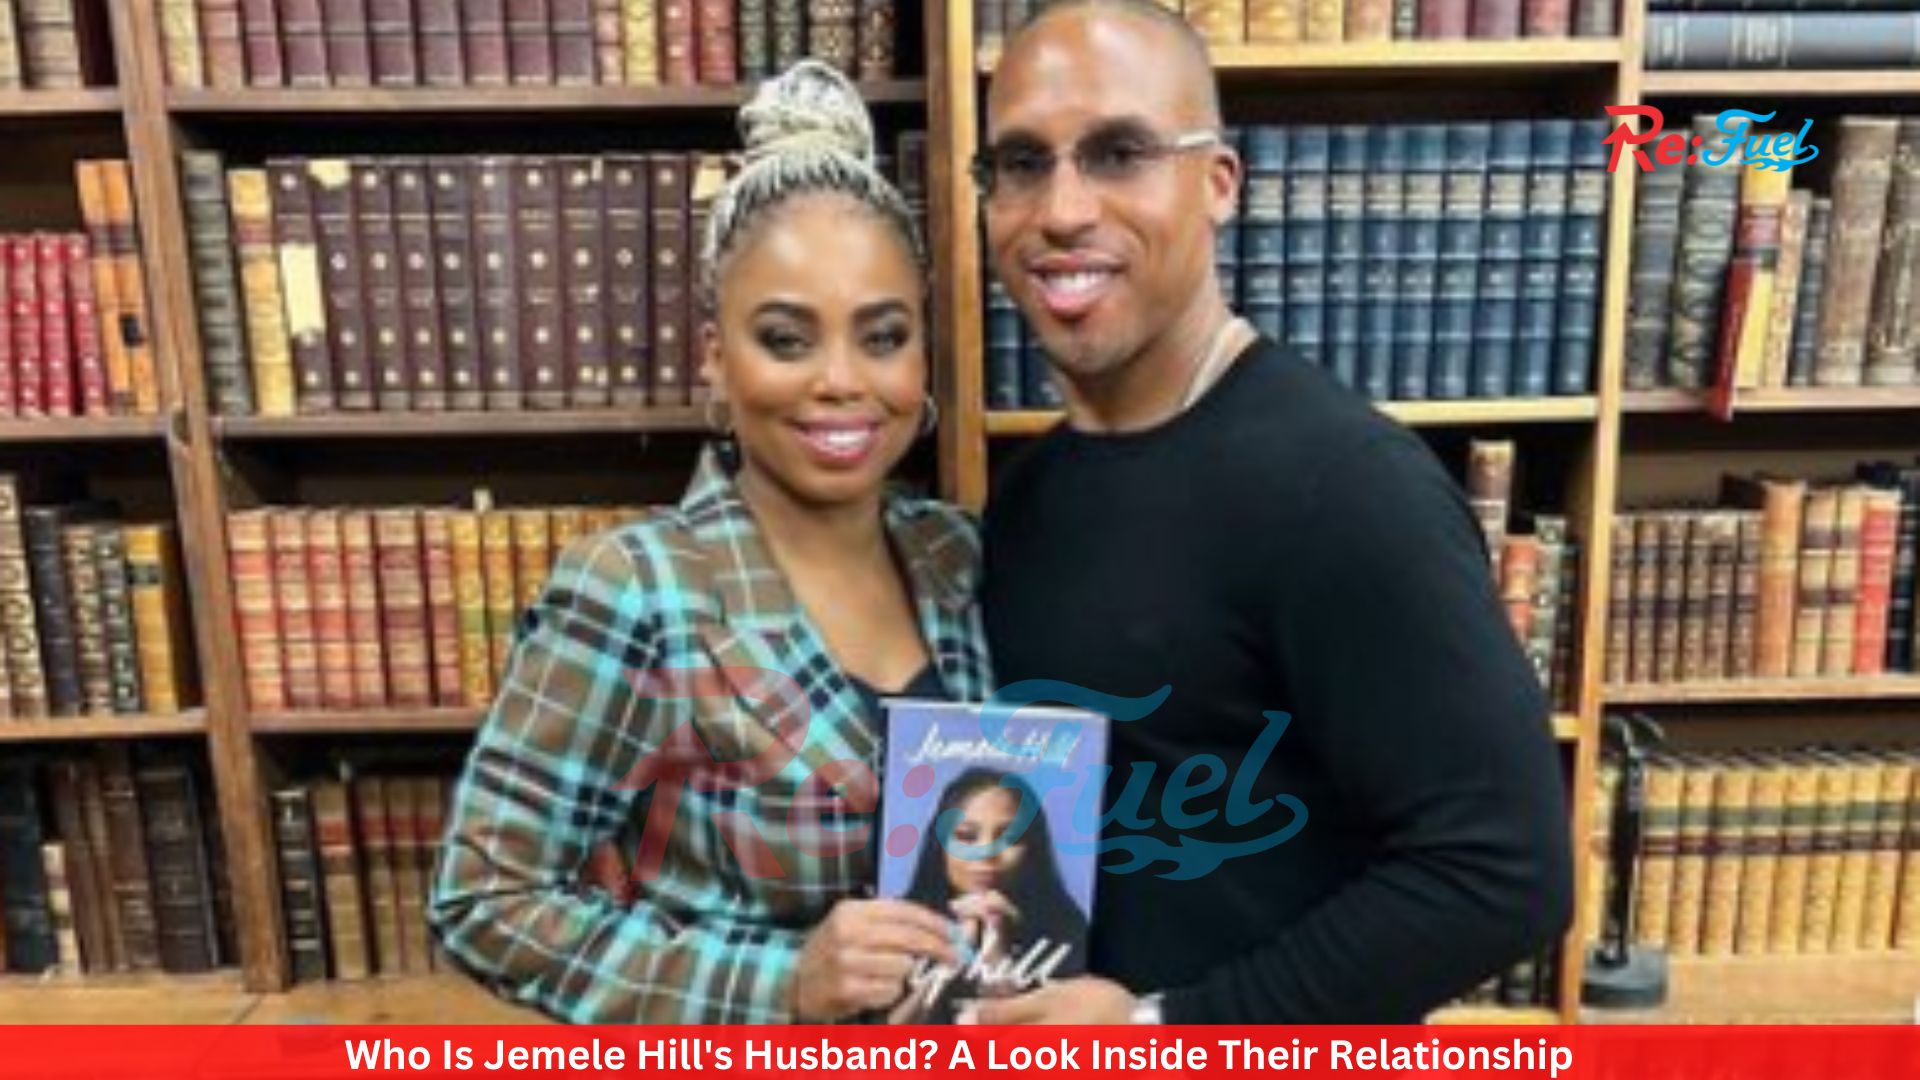 Who Is Jemele Hill's Husband? A Look Inside Their Relationship